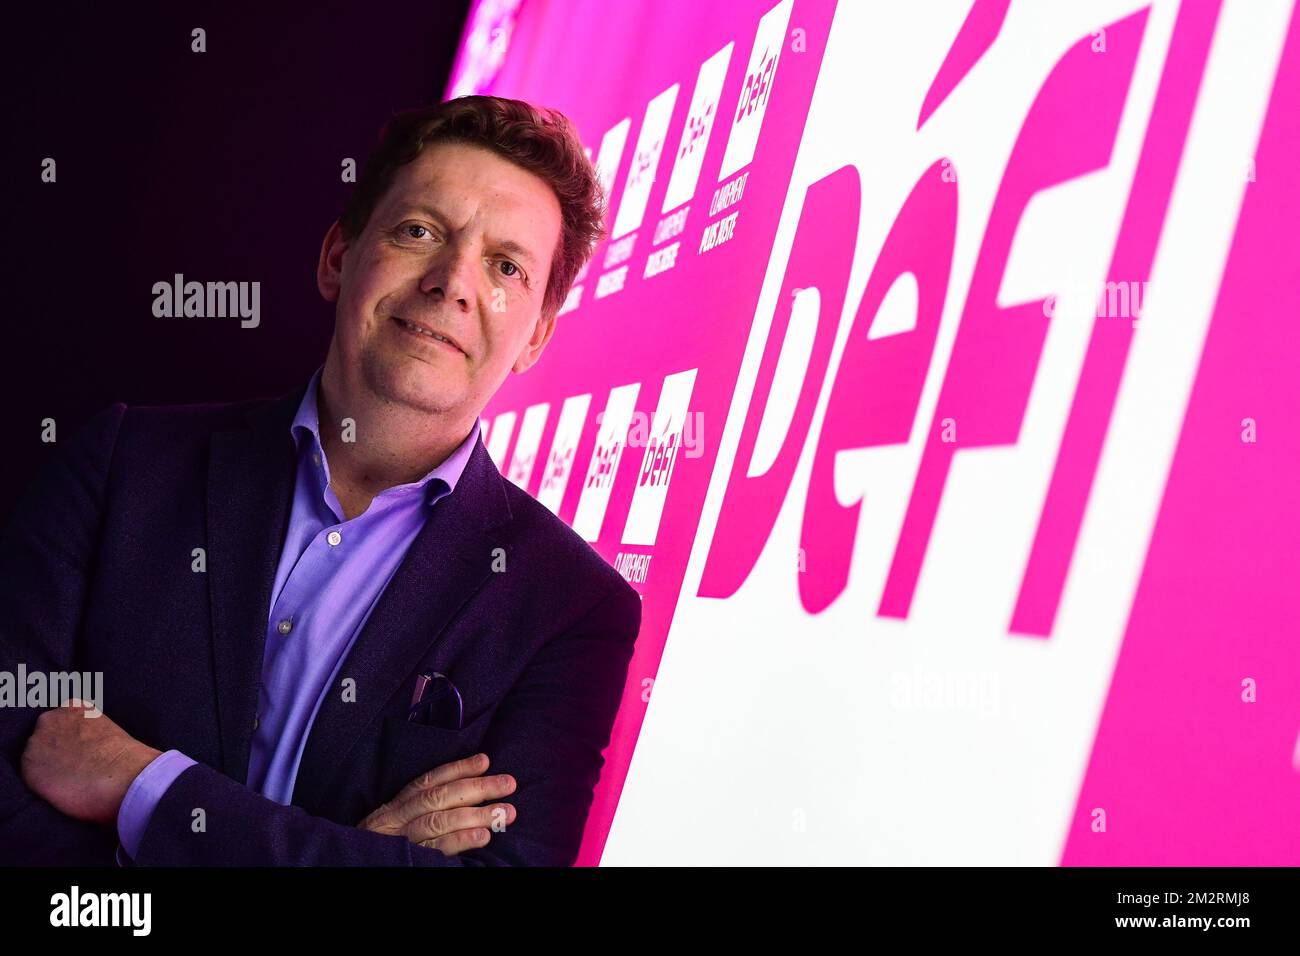 DeFI's Benoit Cassart poses for the photographer at a press conference of federalist party DeFI to launch the campaign for the upcoming elections, Friday 29 March 2019 in Brussels. BELGA PHOTO LAURIE DIEFFEMBACQ Stock Photo